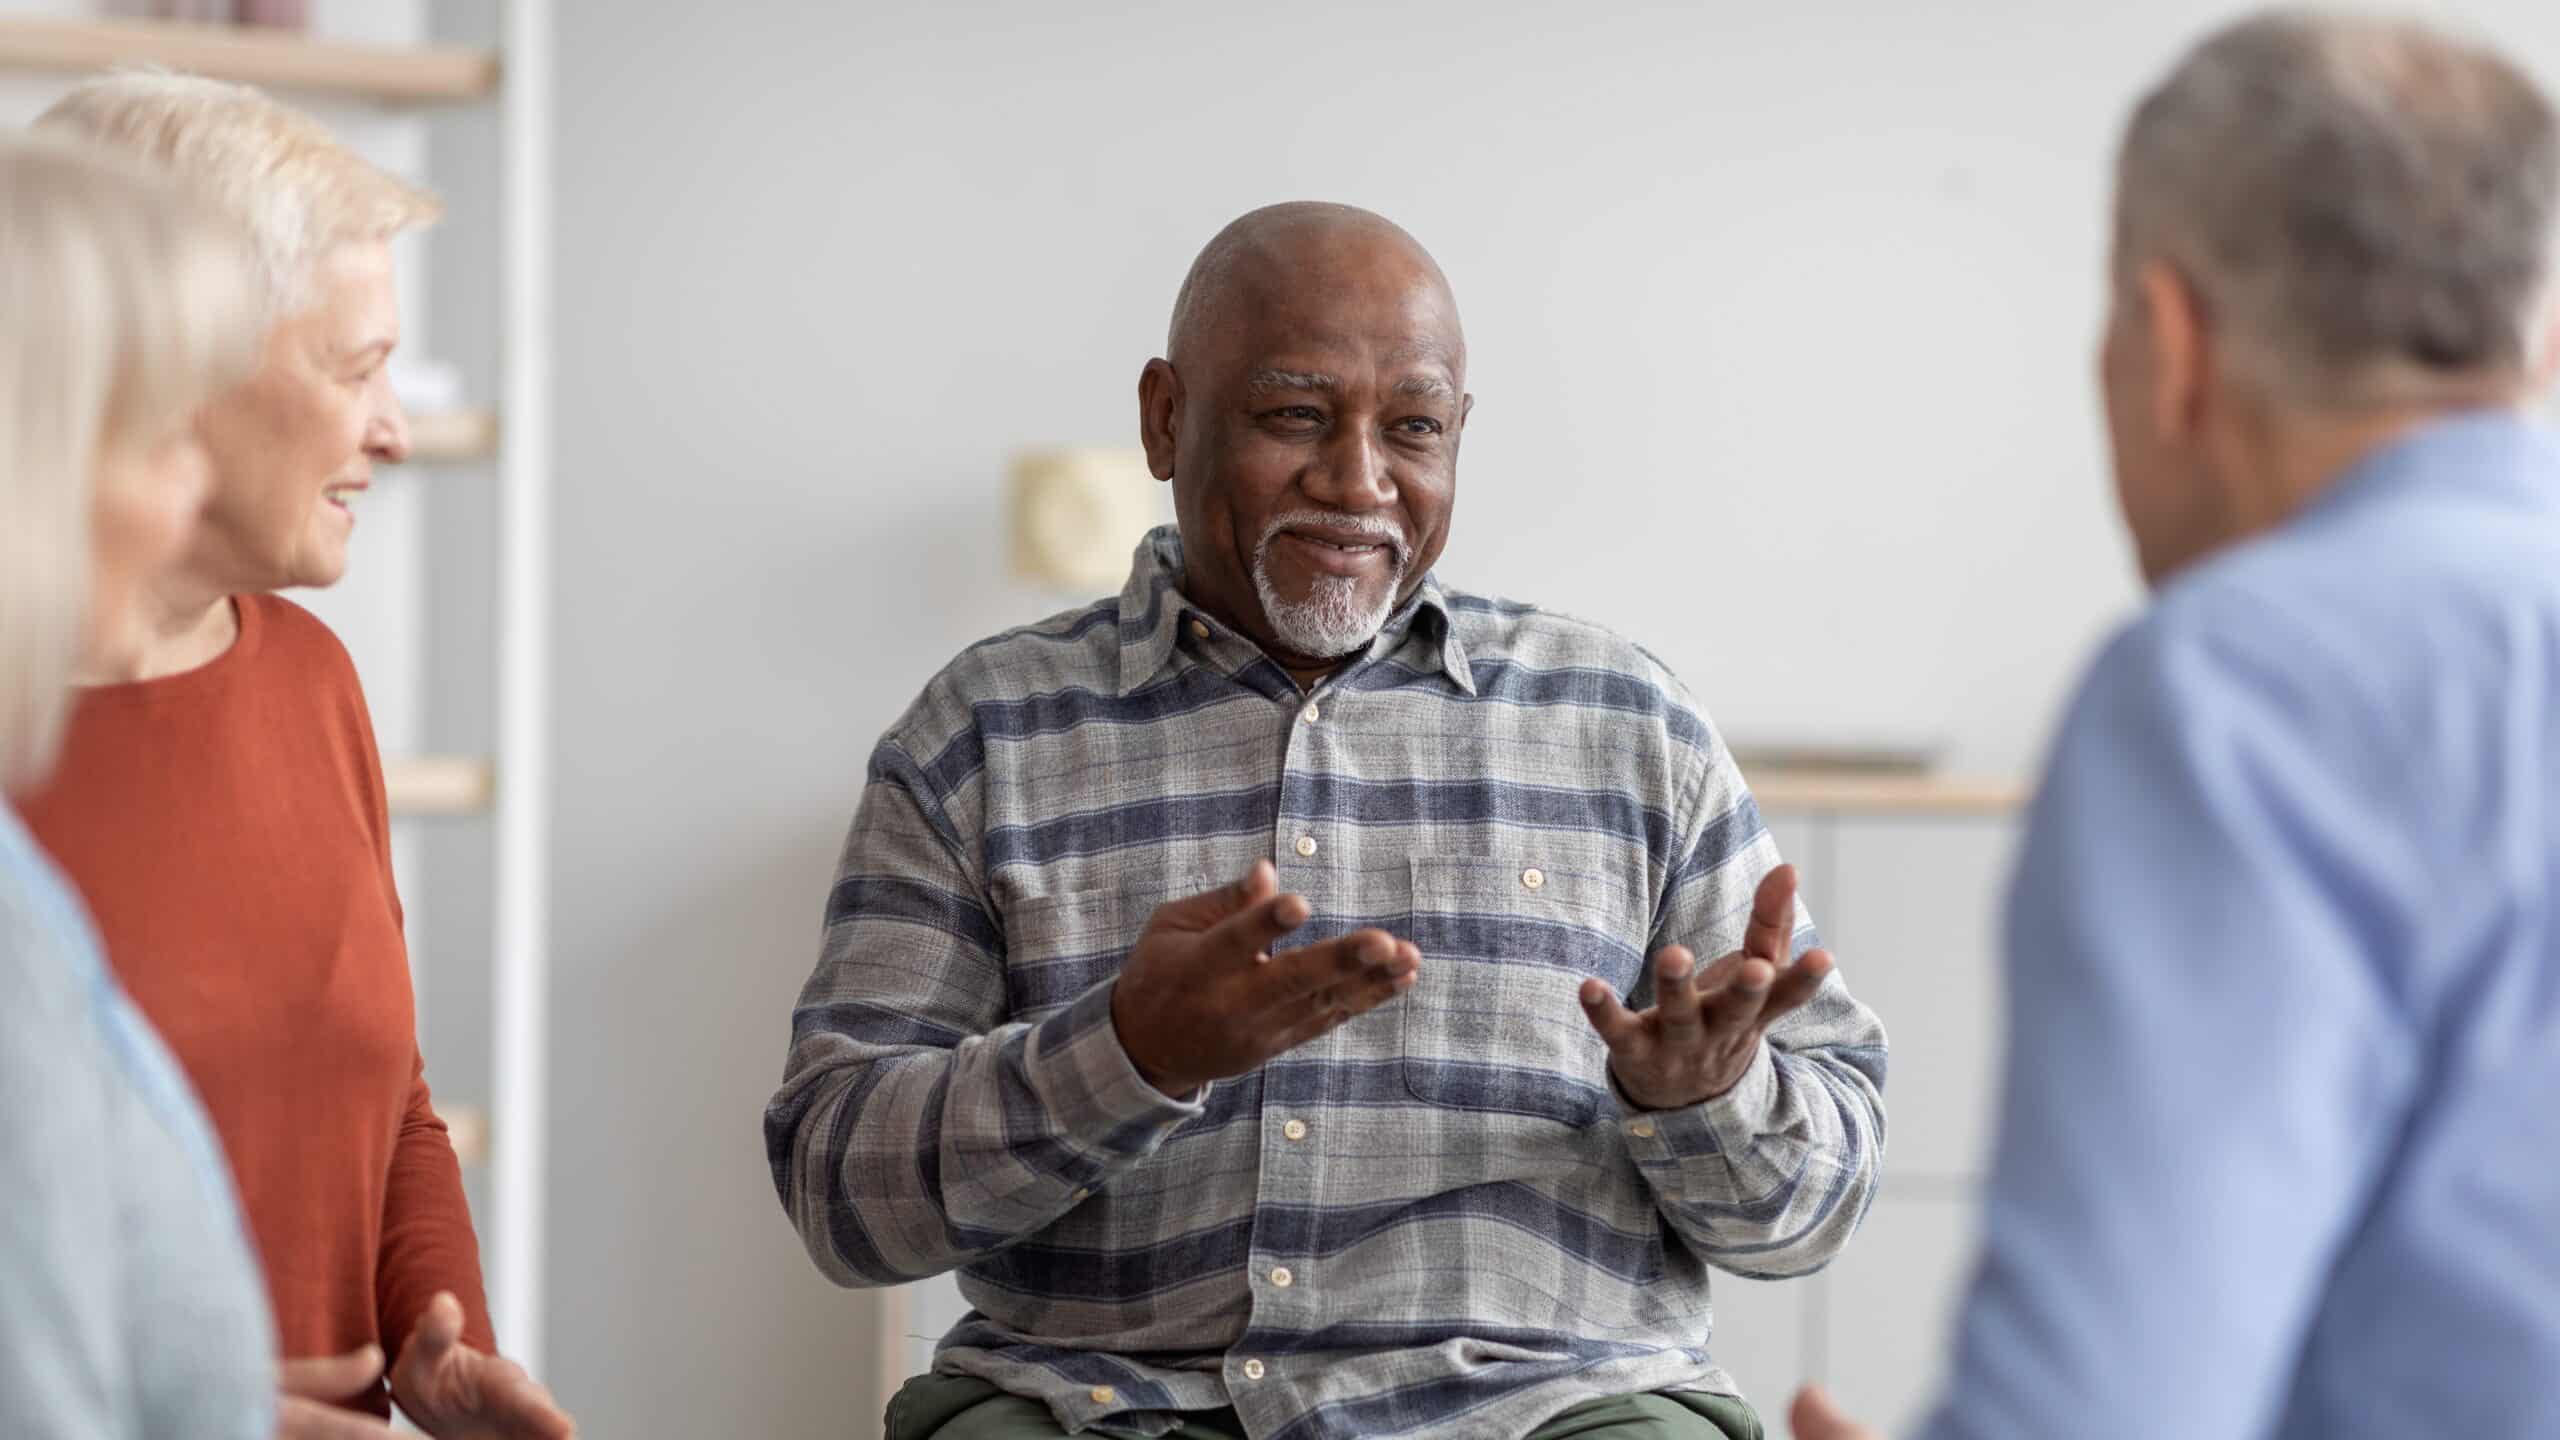 An older Black man speaking to a group of friends